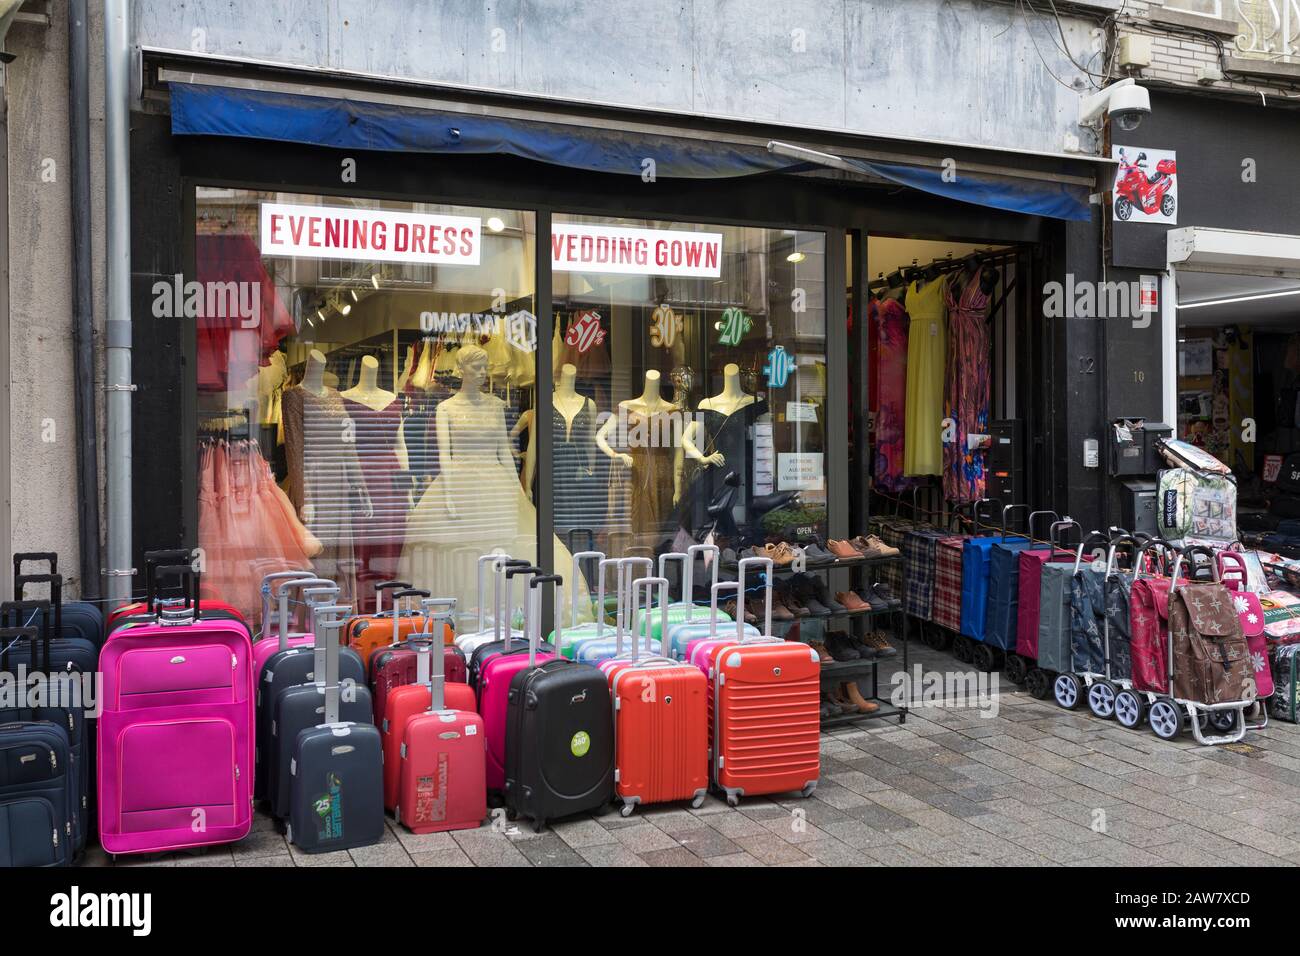 Shop in Antwerp inner city selling suitcases, wedding gowns and womens fashion Stock Photo